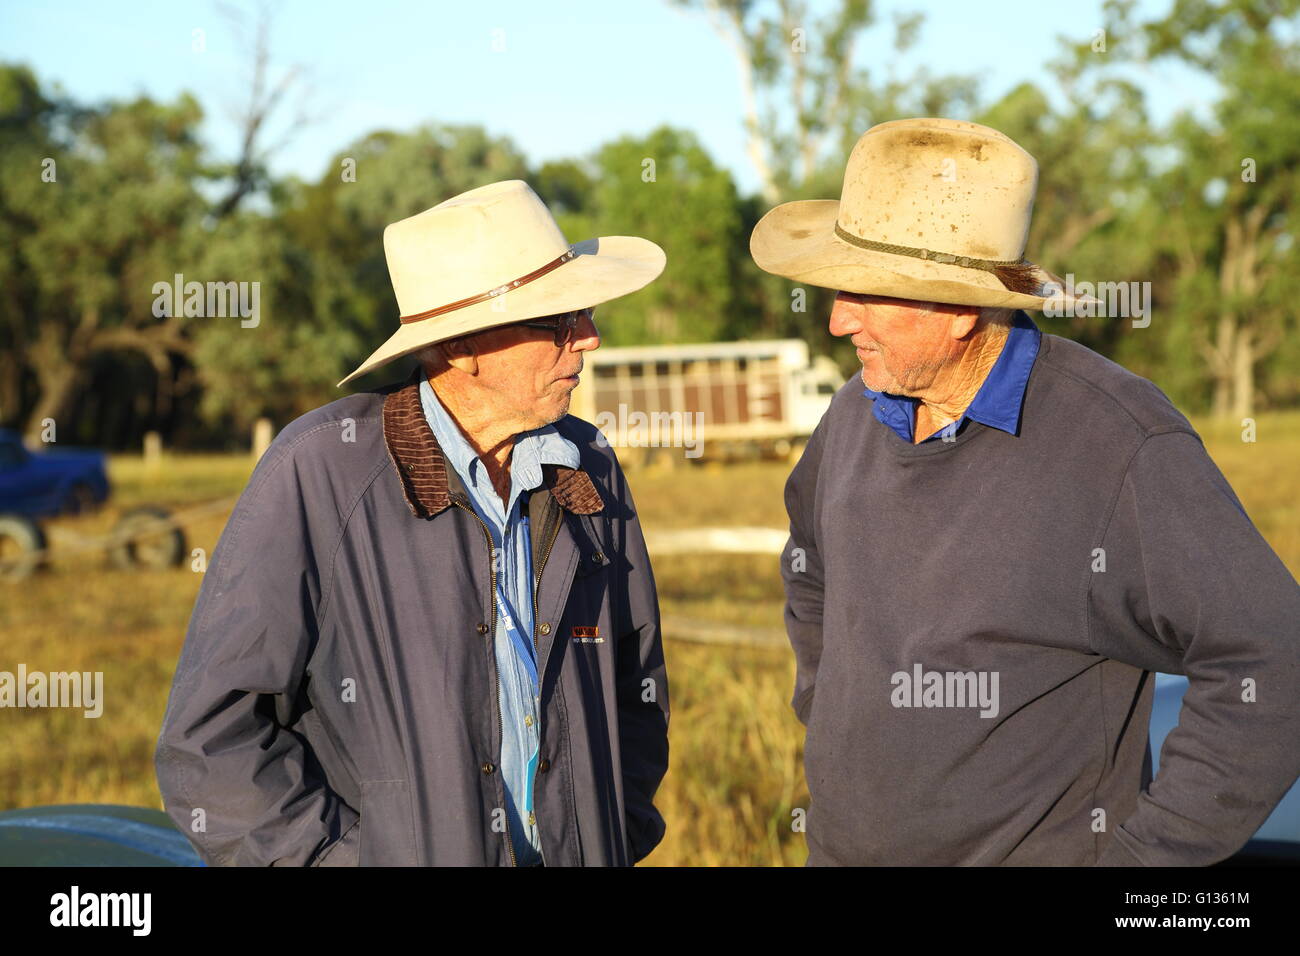 Two cattlemen farmers having a chat. Stock Photo